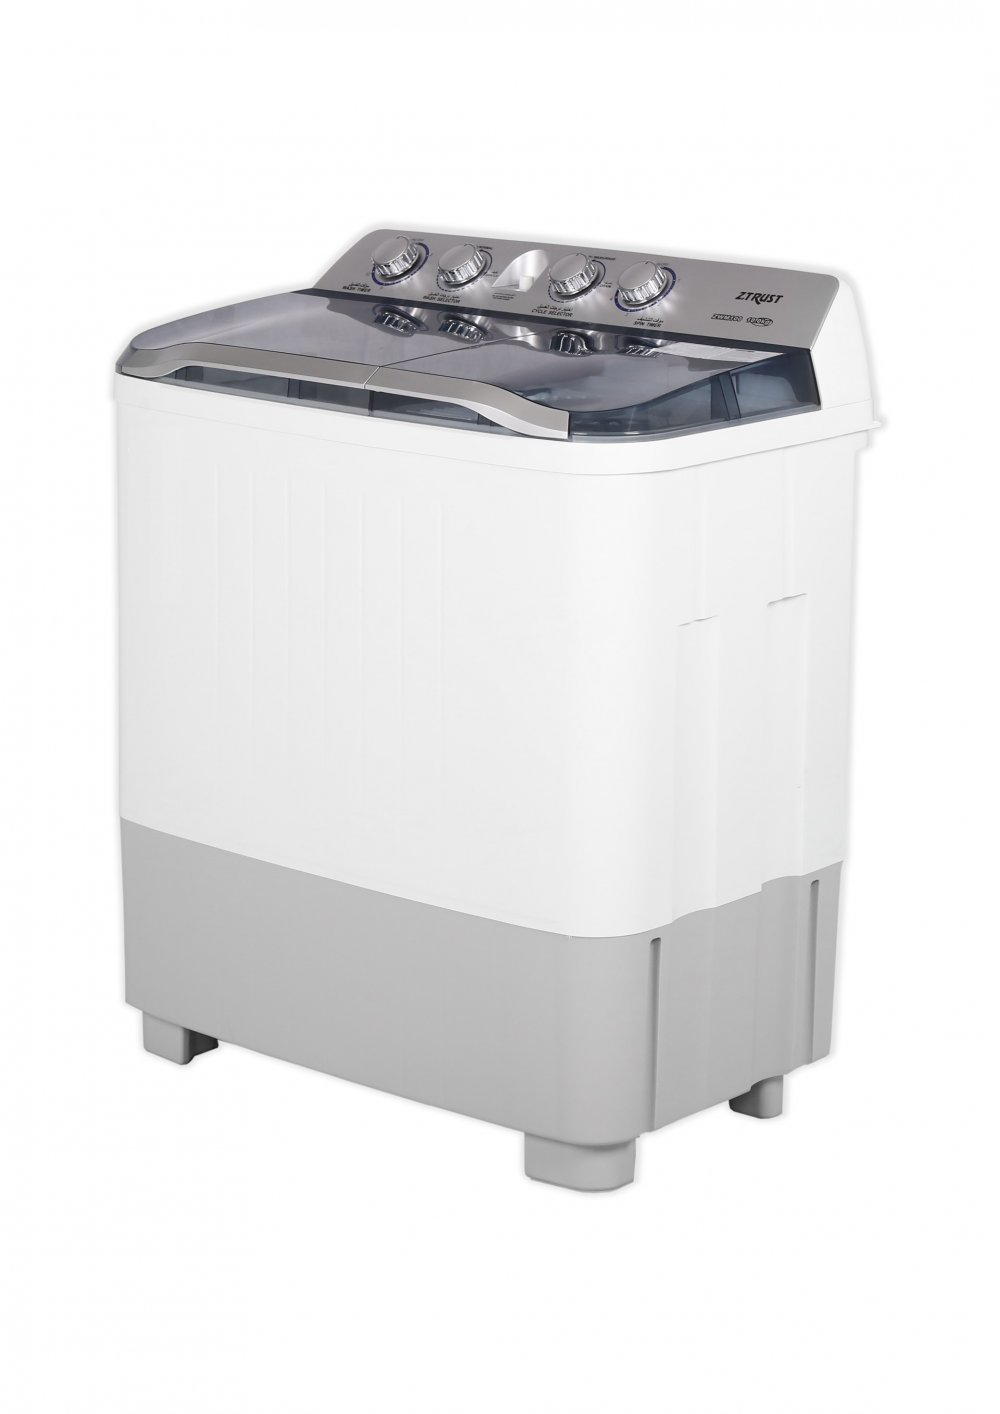 Twin/Top washer, 10K/W,6K/D